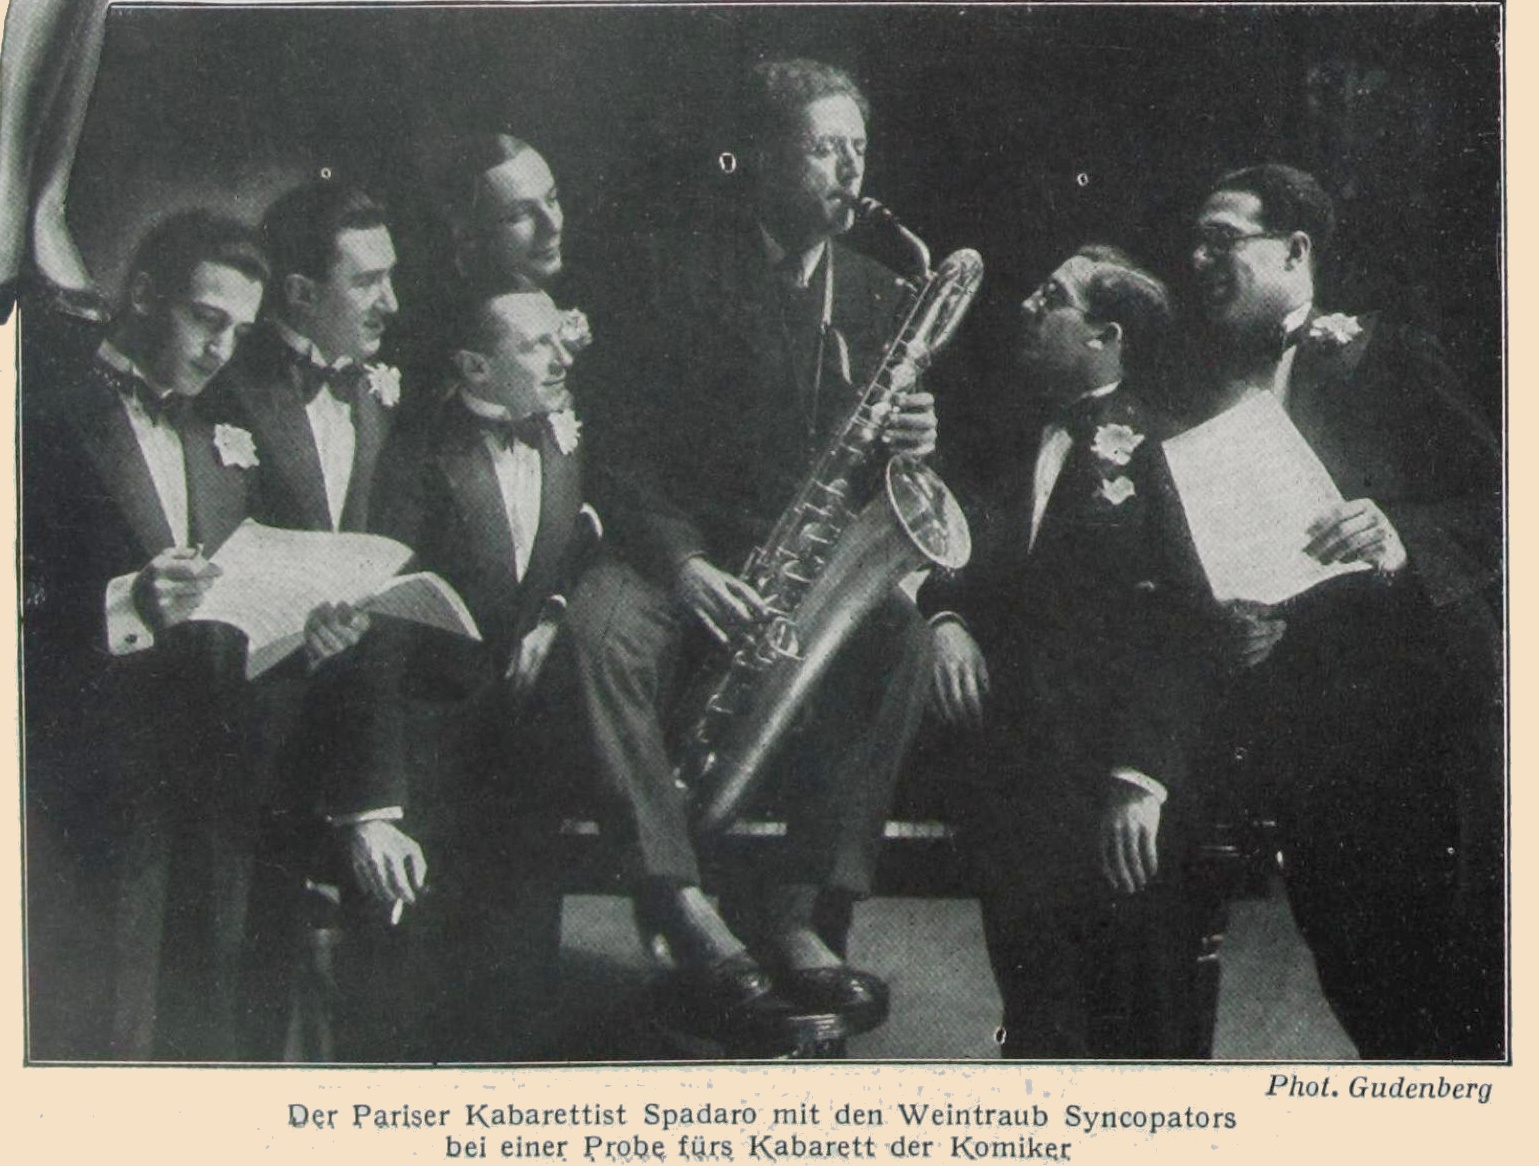  In 1935, the Nazi government did not allow German musicians of Jewish origin to perform any longer. The Weintraub Syncopators – most of whom were Jewish – were forced into exile. 